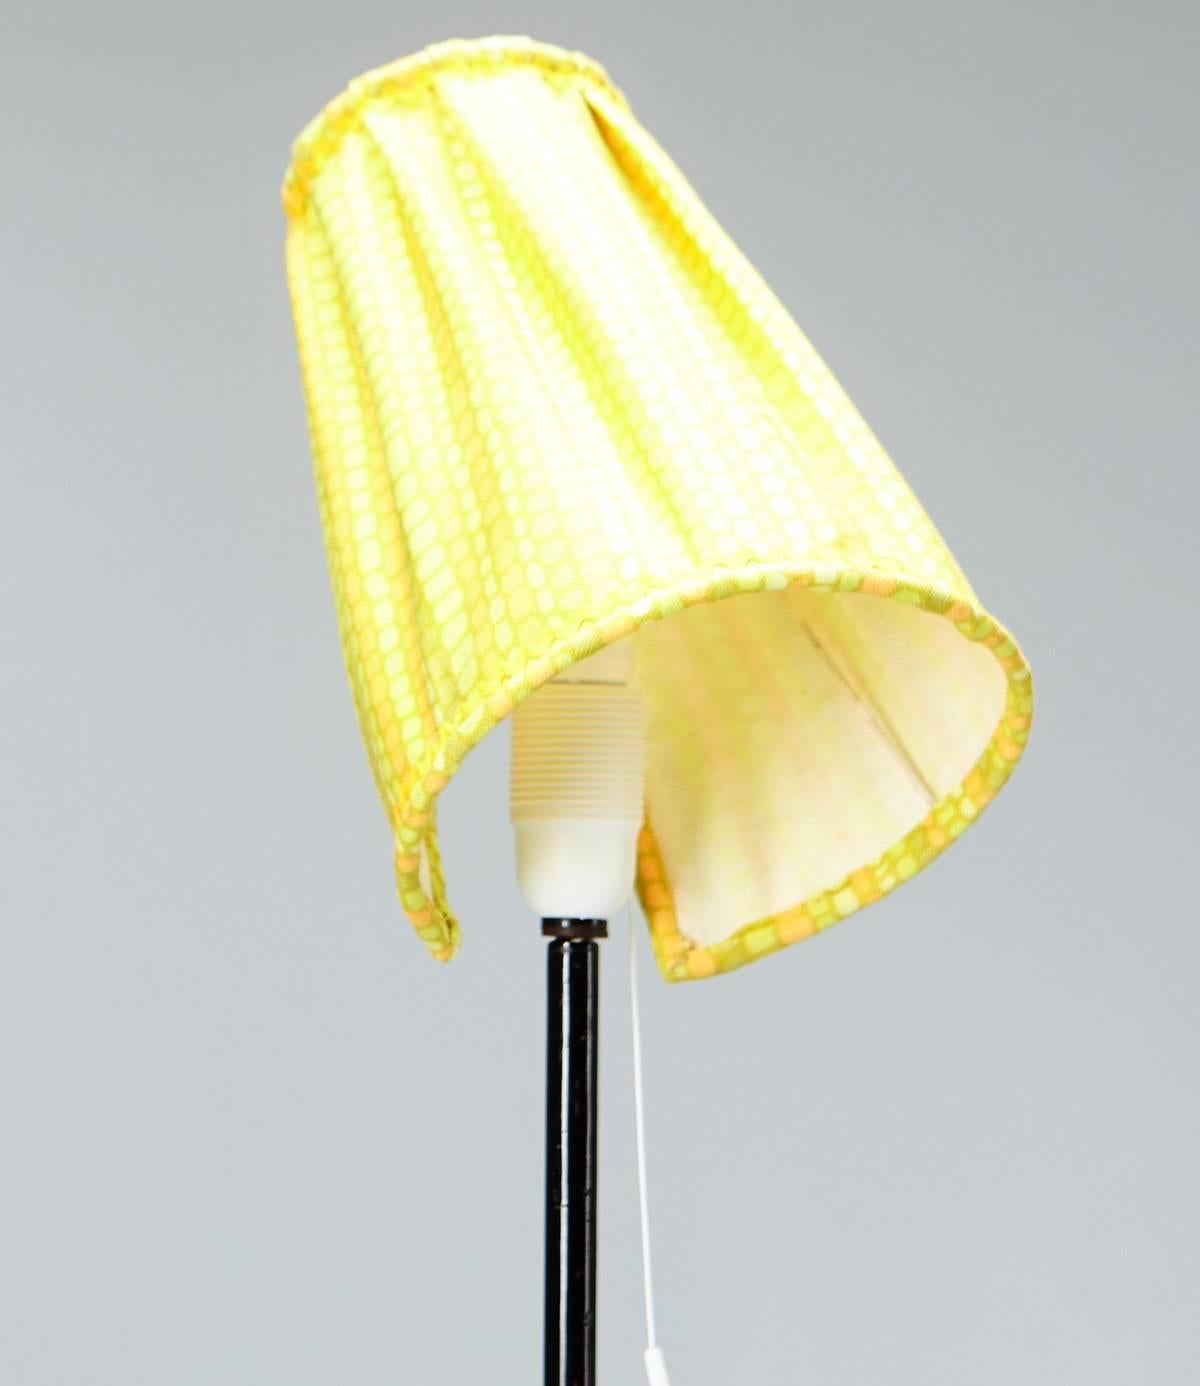 Swedish floor lamp model no. 569 'Giraffen', designed by Hans Bergström and produced by Ateljé Lyktan in 1950s. Base in black lacquered steel tripod and original yellow fabric shade.